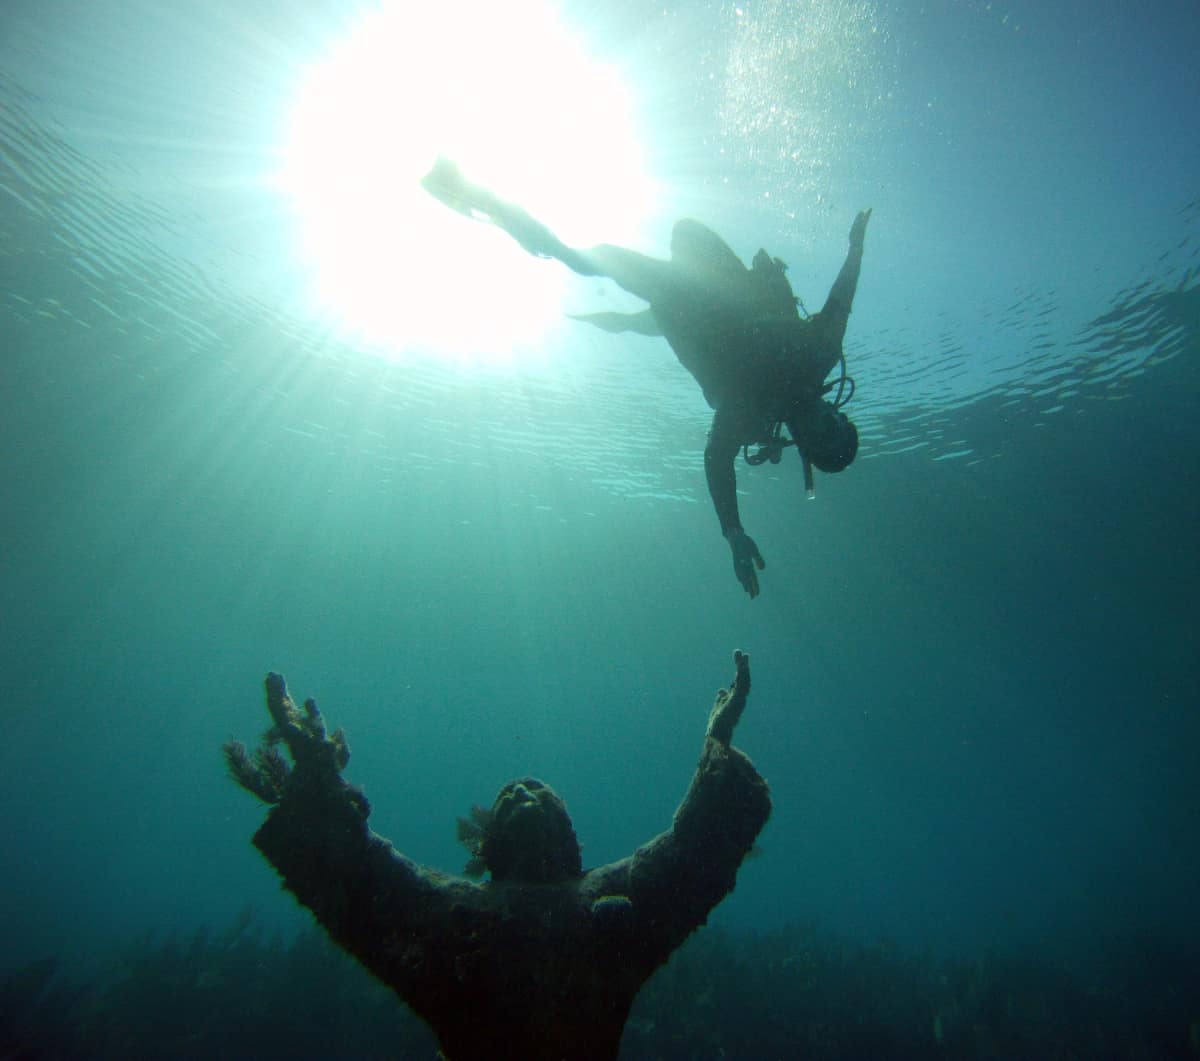 Scuba diver reaching down to Christ of the Abyss in Florida